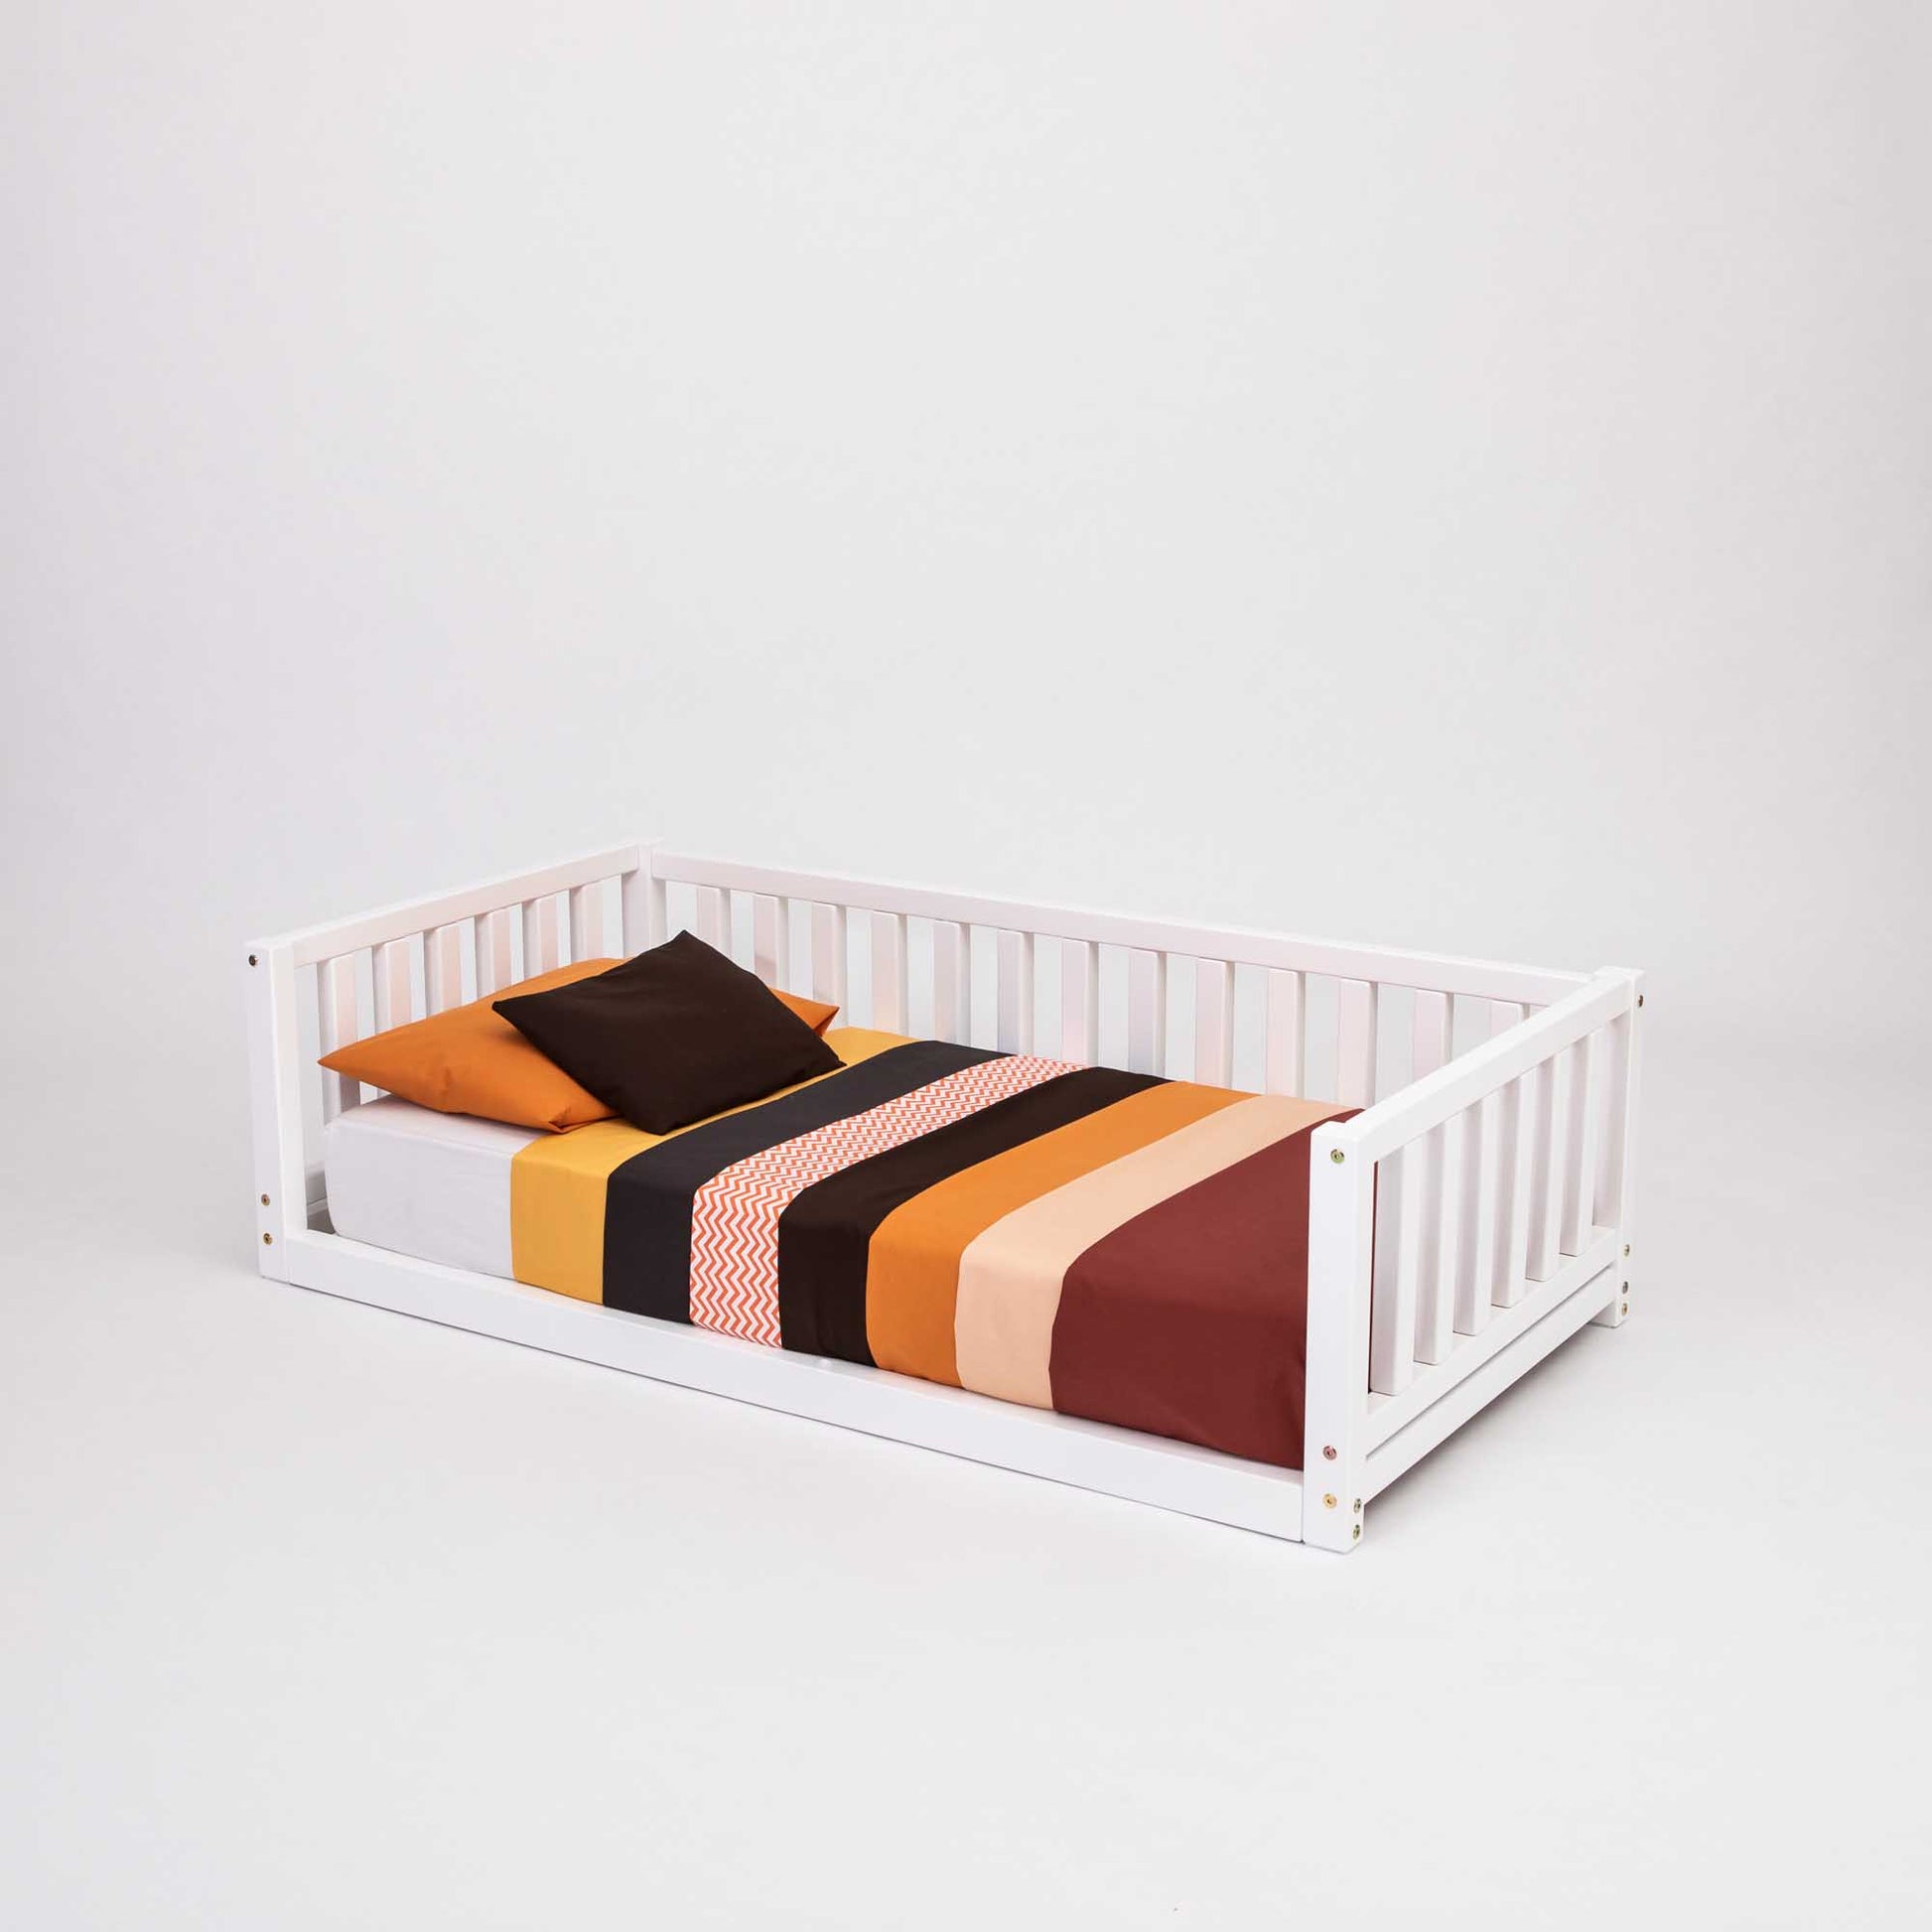 A Montessori bed with 3-sided rails from Sweet Home From Wood, perfect for young children transitioning from a crib.